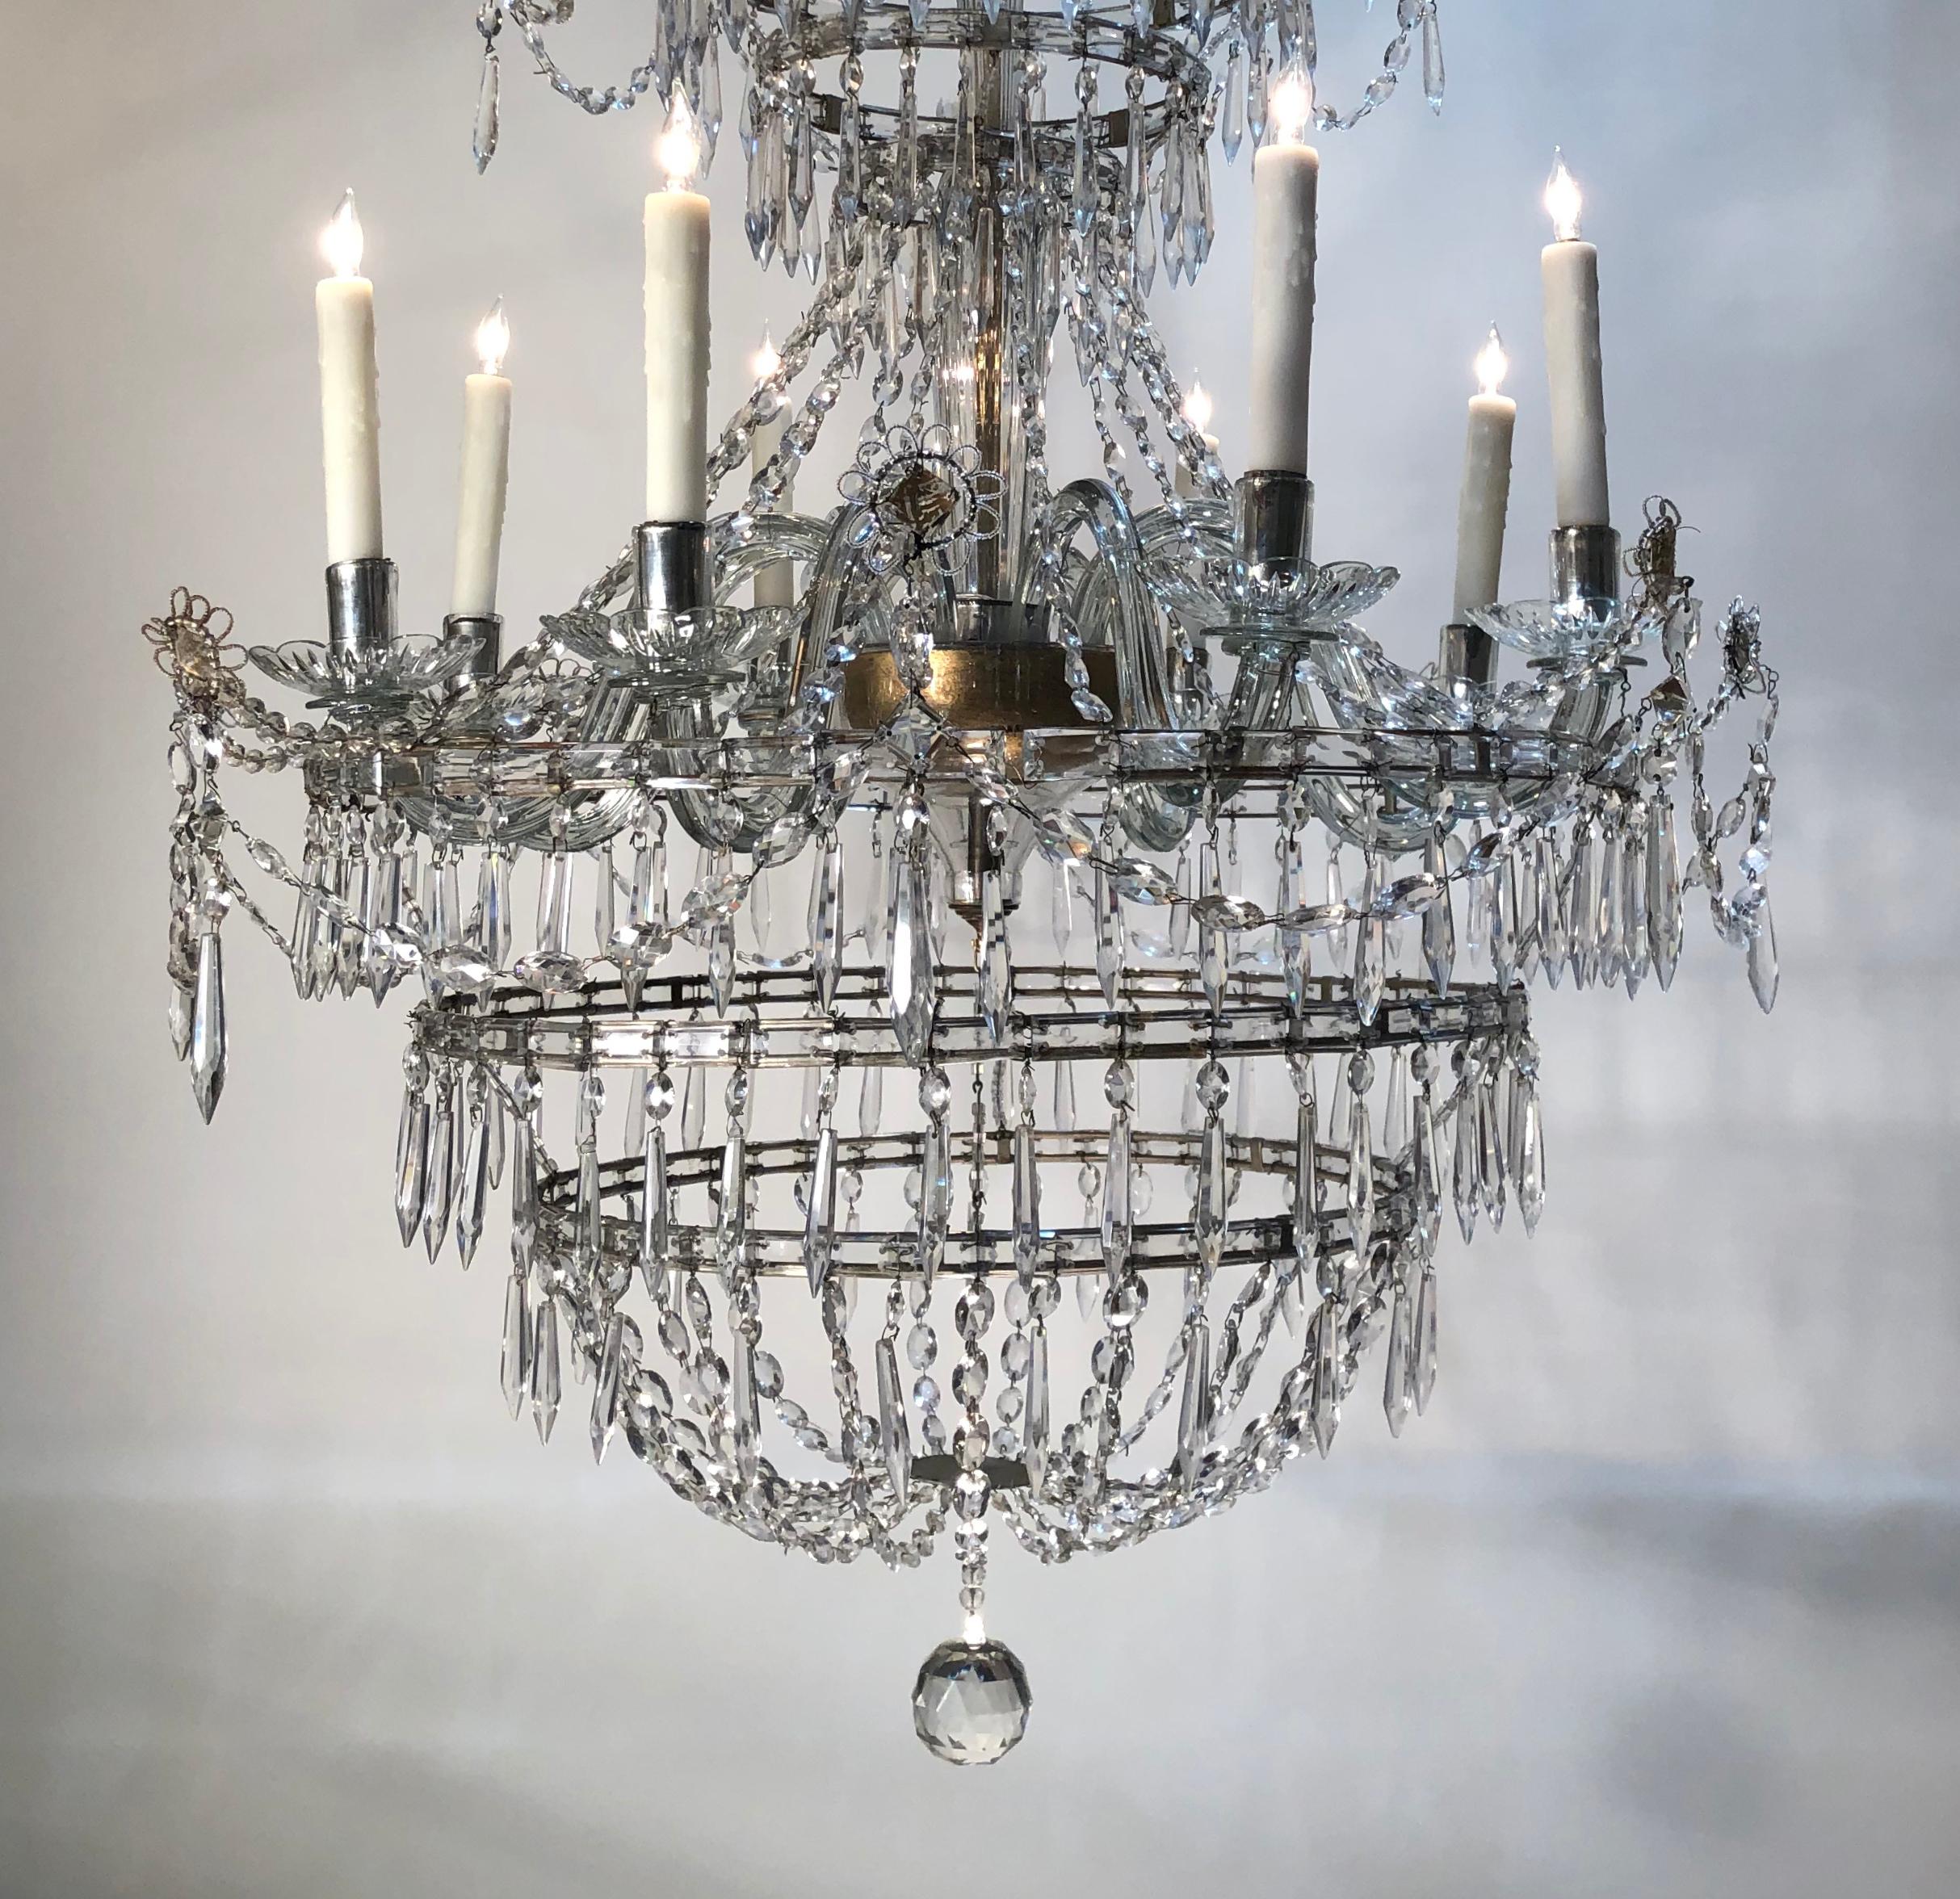 Rare late 18th century Georgian crystal eight-arm chandelier, originally candle. This stunning chandelier is English and of the neoclassical period. The eight crystal candle branches are encased in a crystal beaded frame. This exceptional chandelier